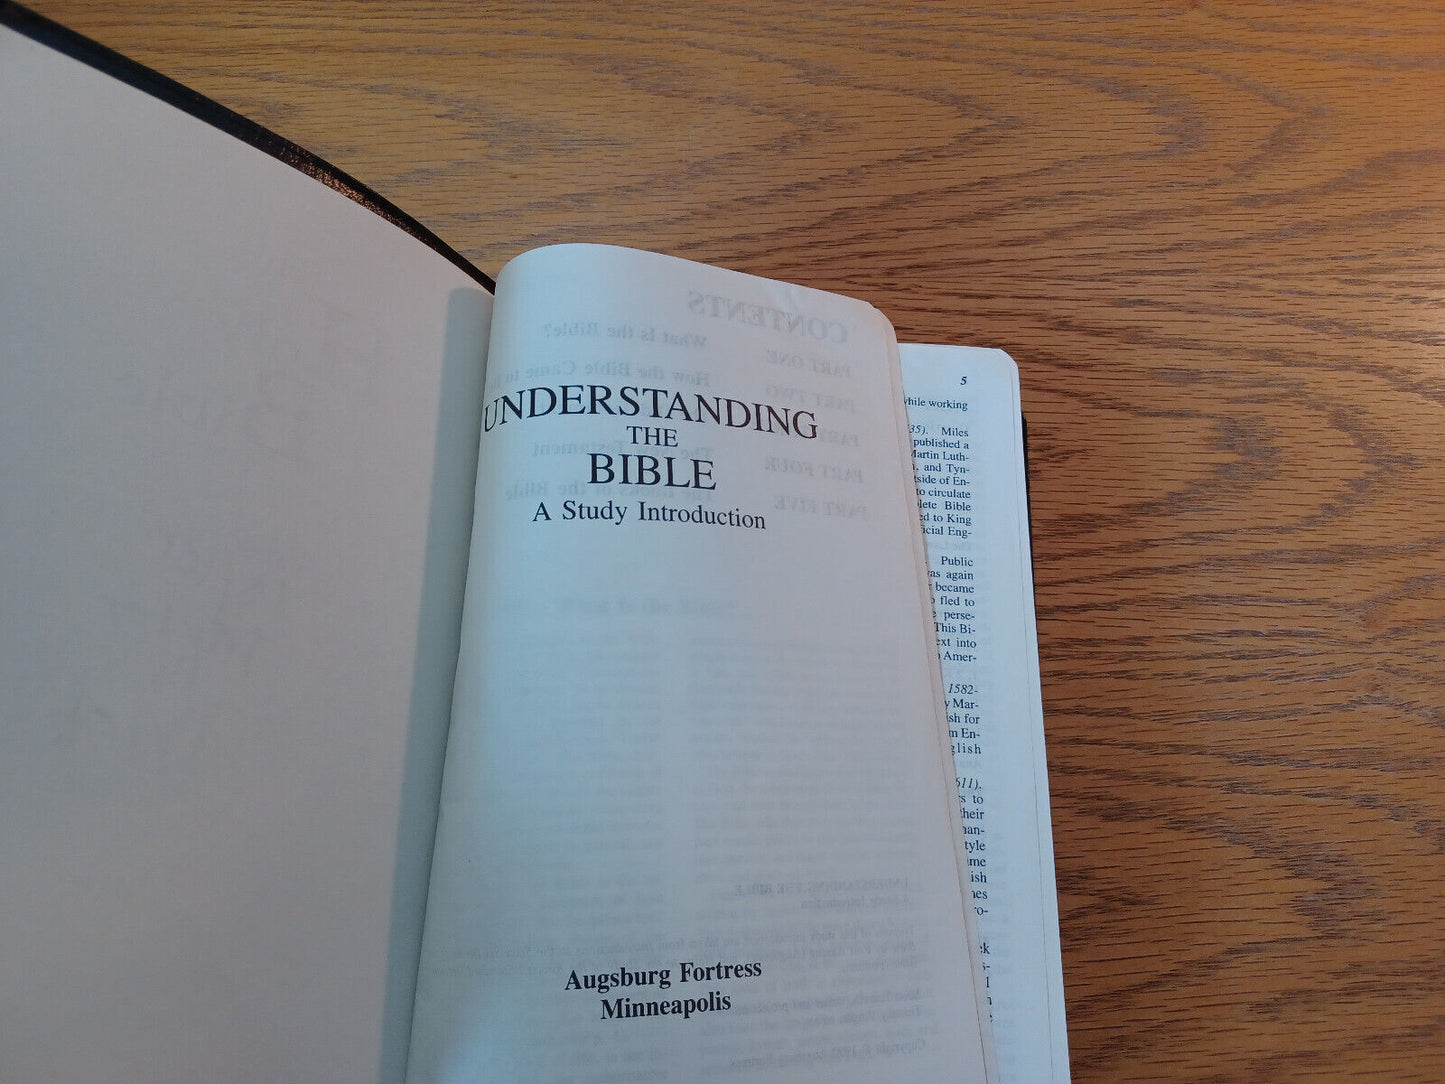 Holy Bible New Revised Standard Version 1990 Study Helps Augsburg Fortress